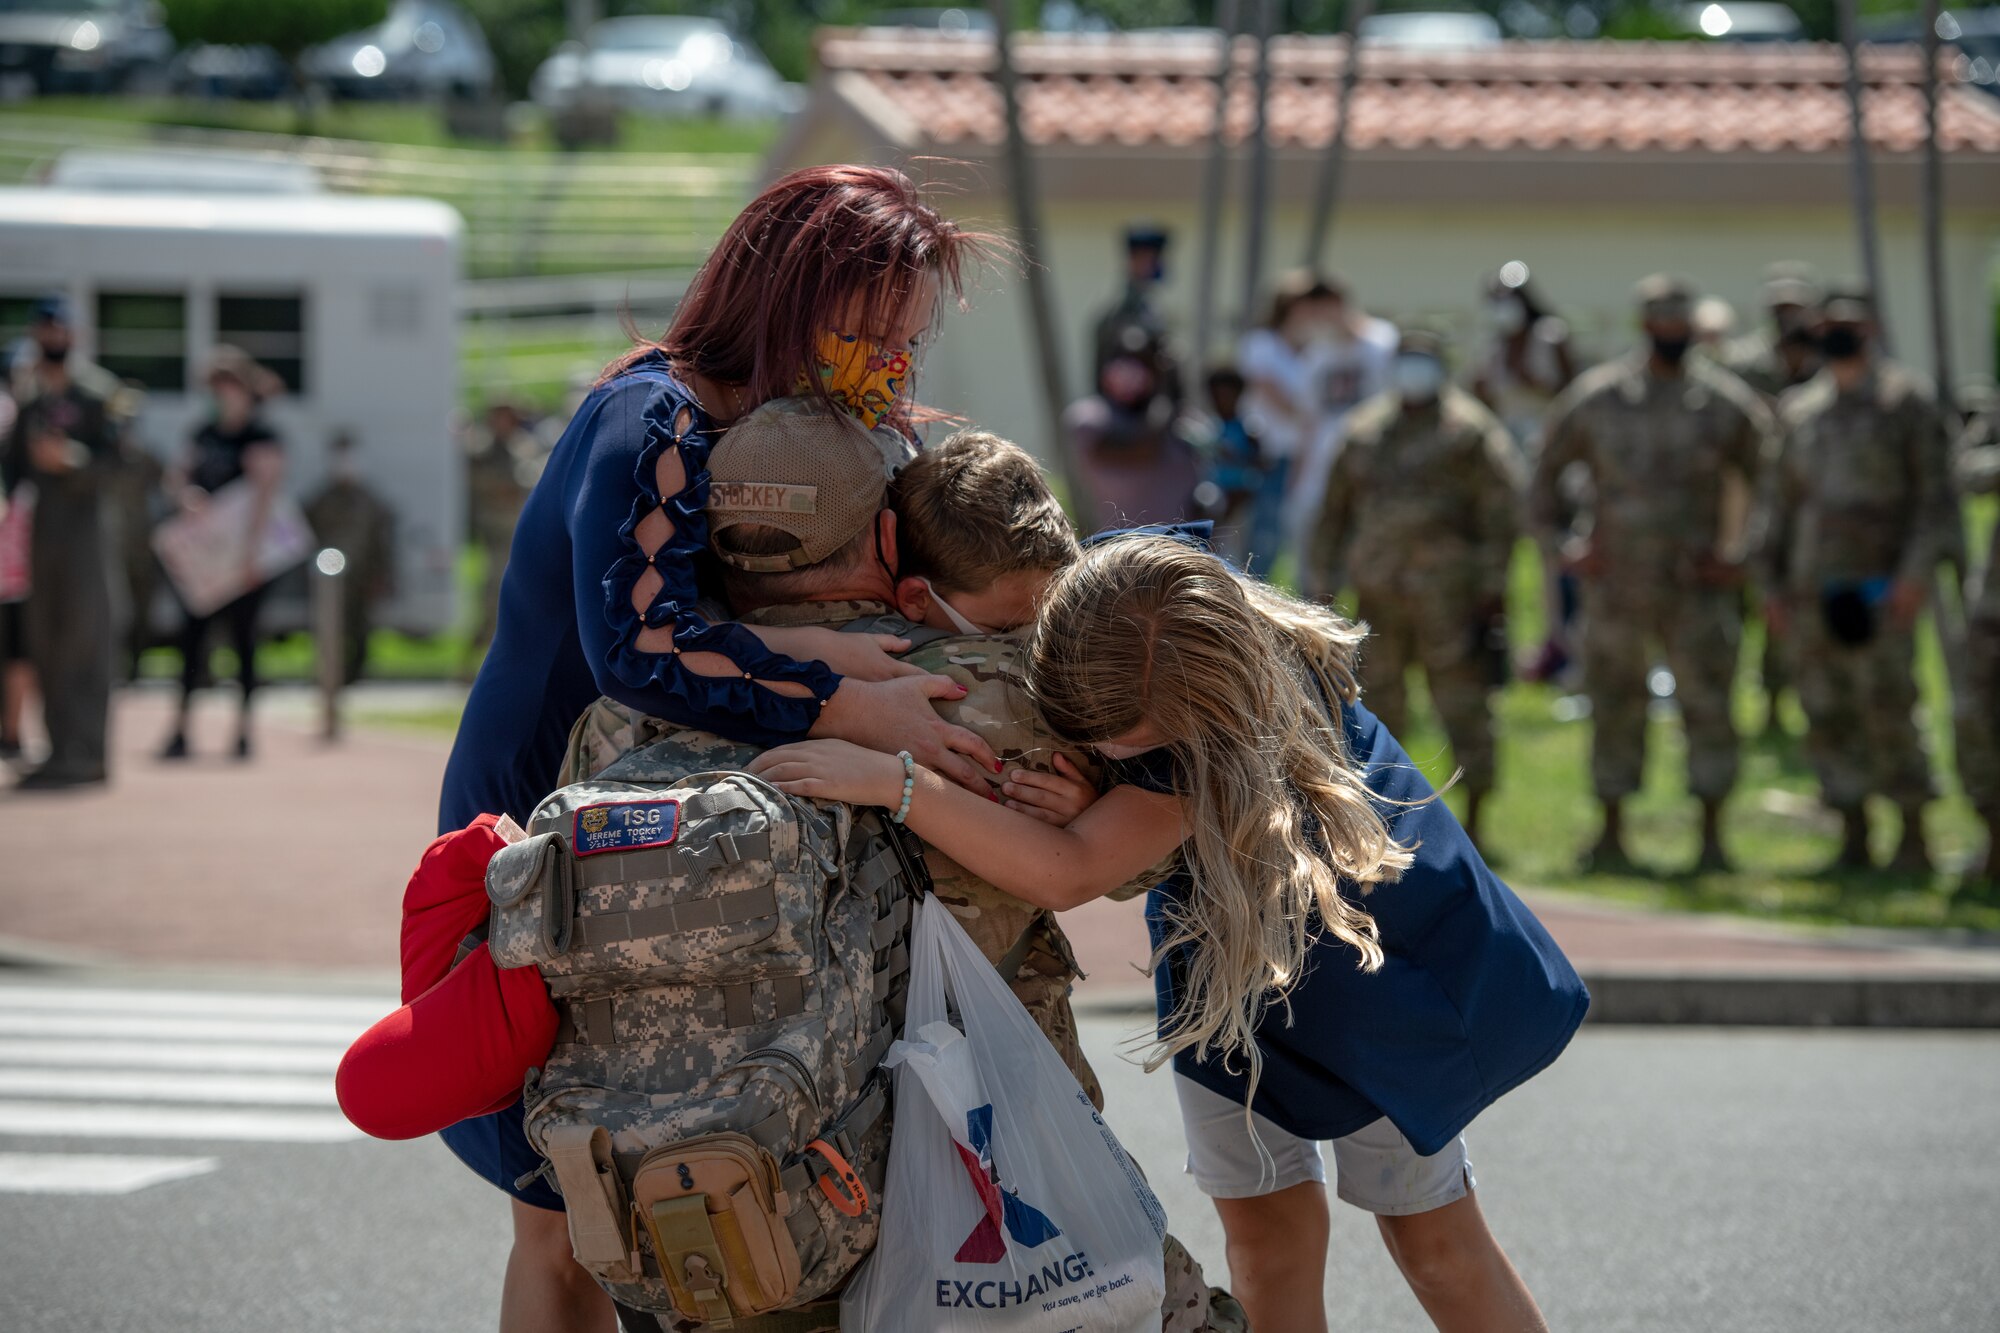 U.S. Air Force Master Sgt. Jereme Tockey, 18th Aircraft Maintenance Squadron first sergeant, embraces his family after returning from a deployment to U.S. Central Command Oct. 6, 2020, at Kadena Air Base, Japan. While deployed to the CENTCOM area of responsibility, Airmen conducted more than 1,000 sorties and 5,300 combat hours, which drove 13 phase inspections in six months. They’ll share the skills they learned in combat with Team Kadena, joint partners and allies to ensure a free and open Indo-Pacific. (U.S. Air Force photo by Staff Sgt. Peter Reft)